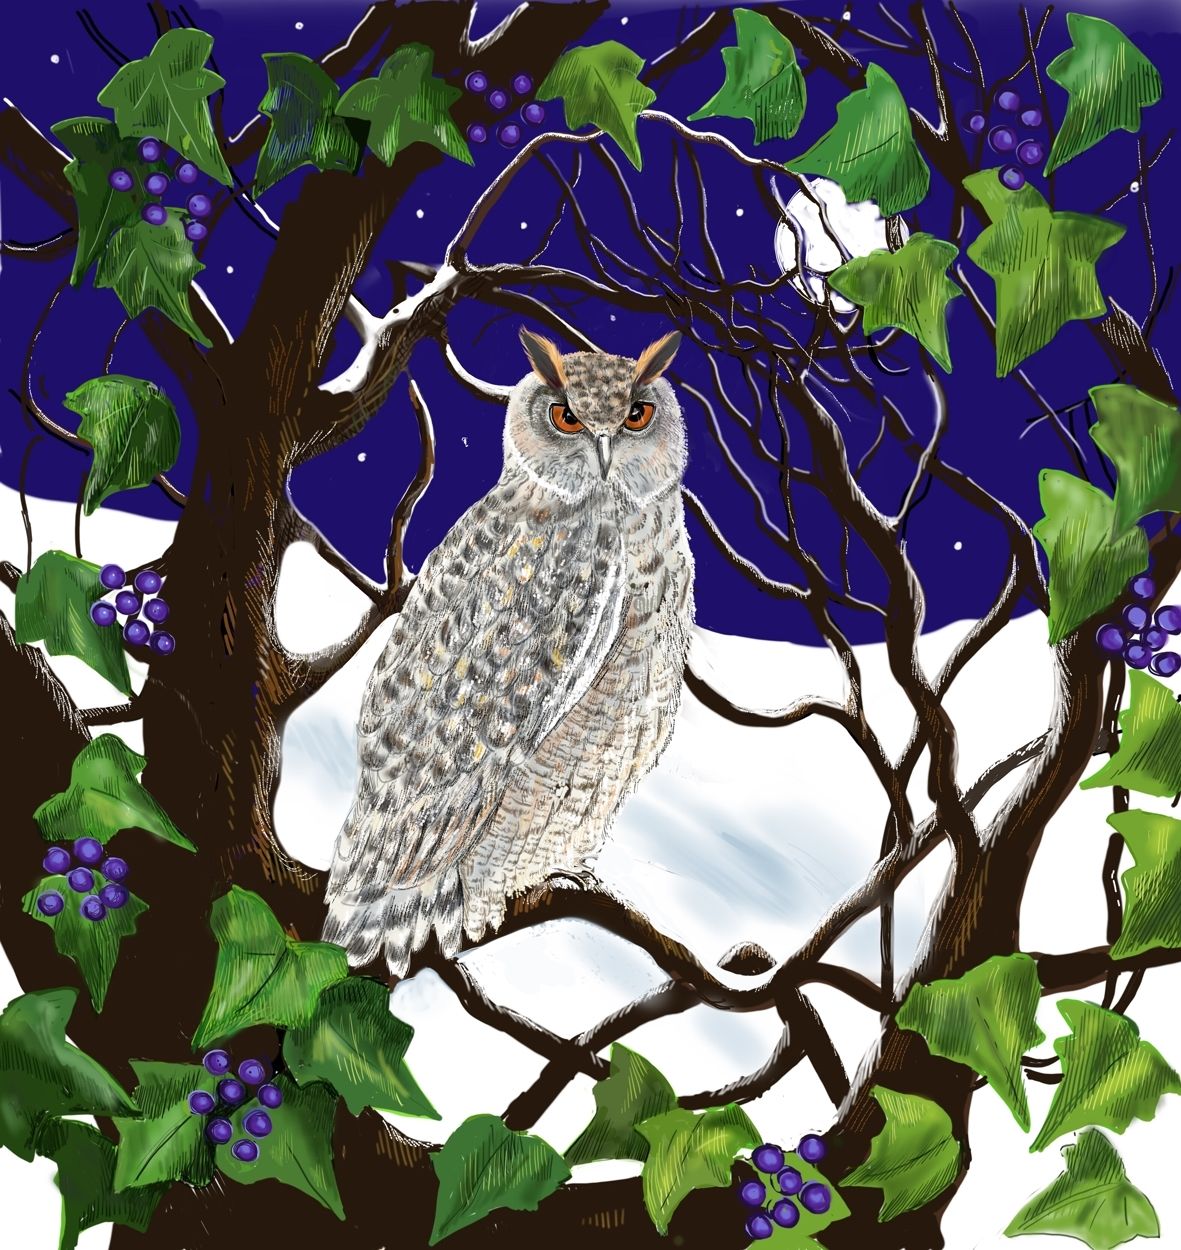 Night Owl by Jane Peart